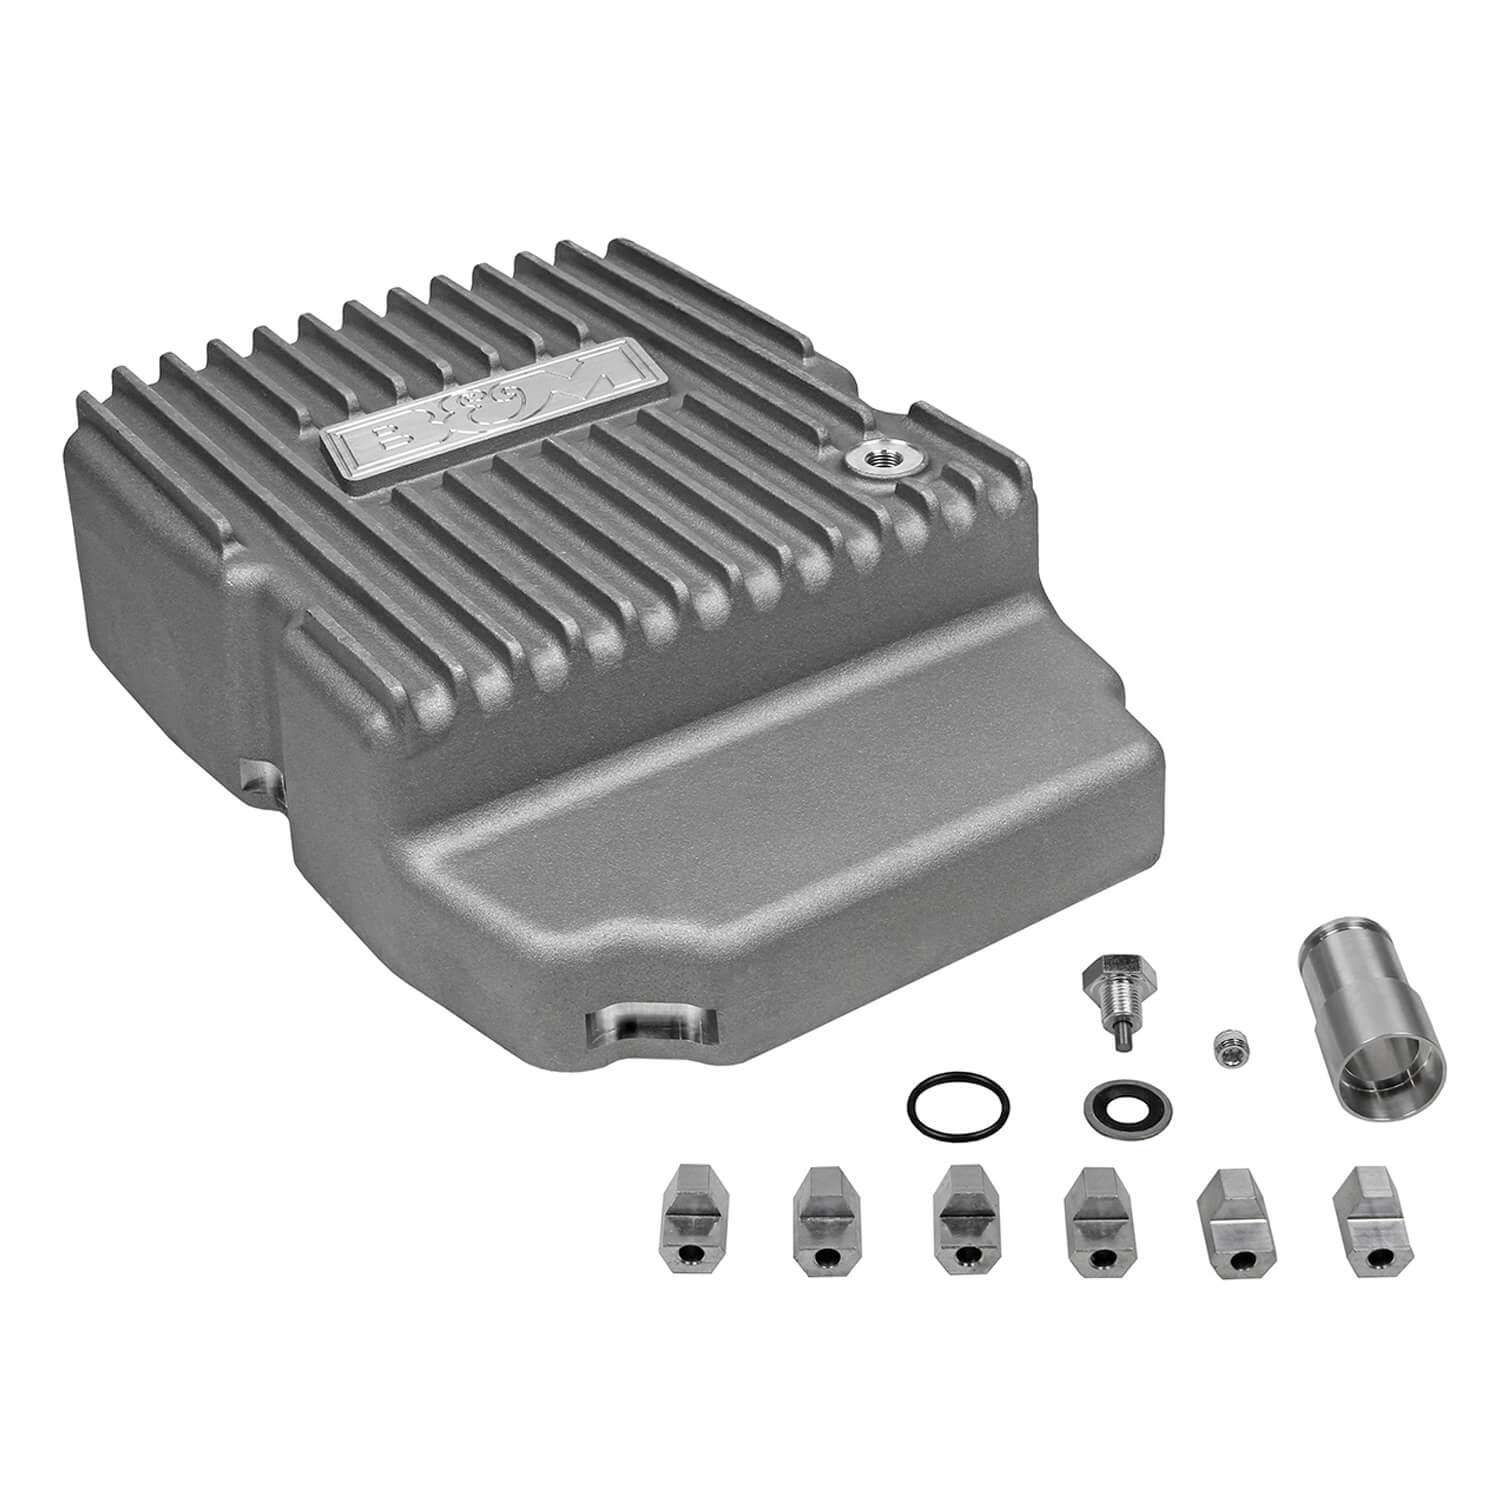 Does the B&M Hi-Tek Deep Transmission Pan for NAG1 - 10300 fit a 2012 Jeep Wrangler with 3.6L Automatic?